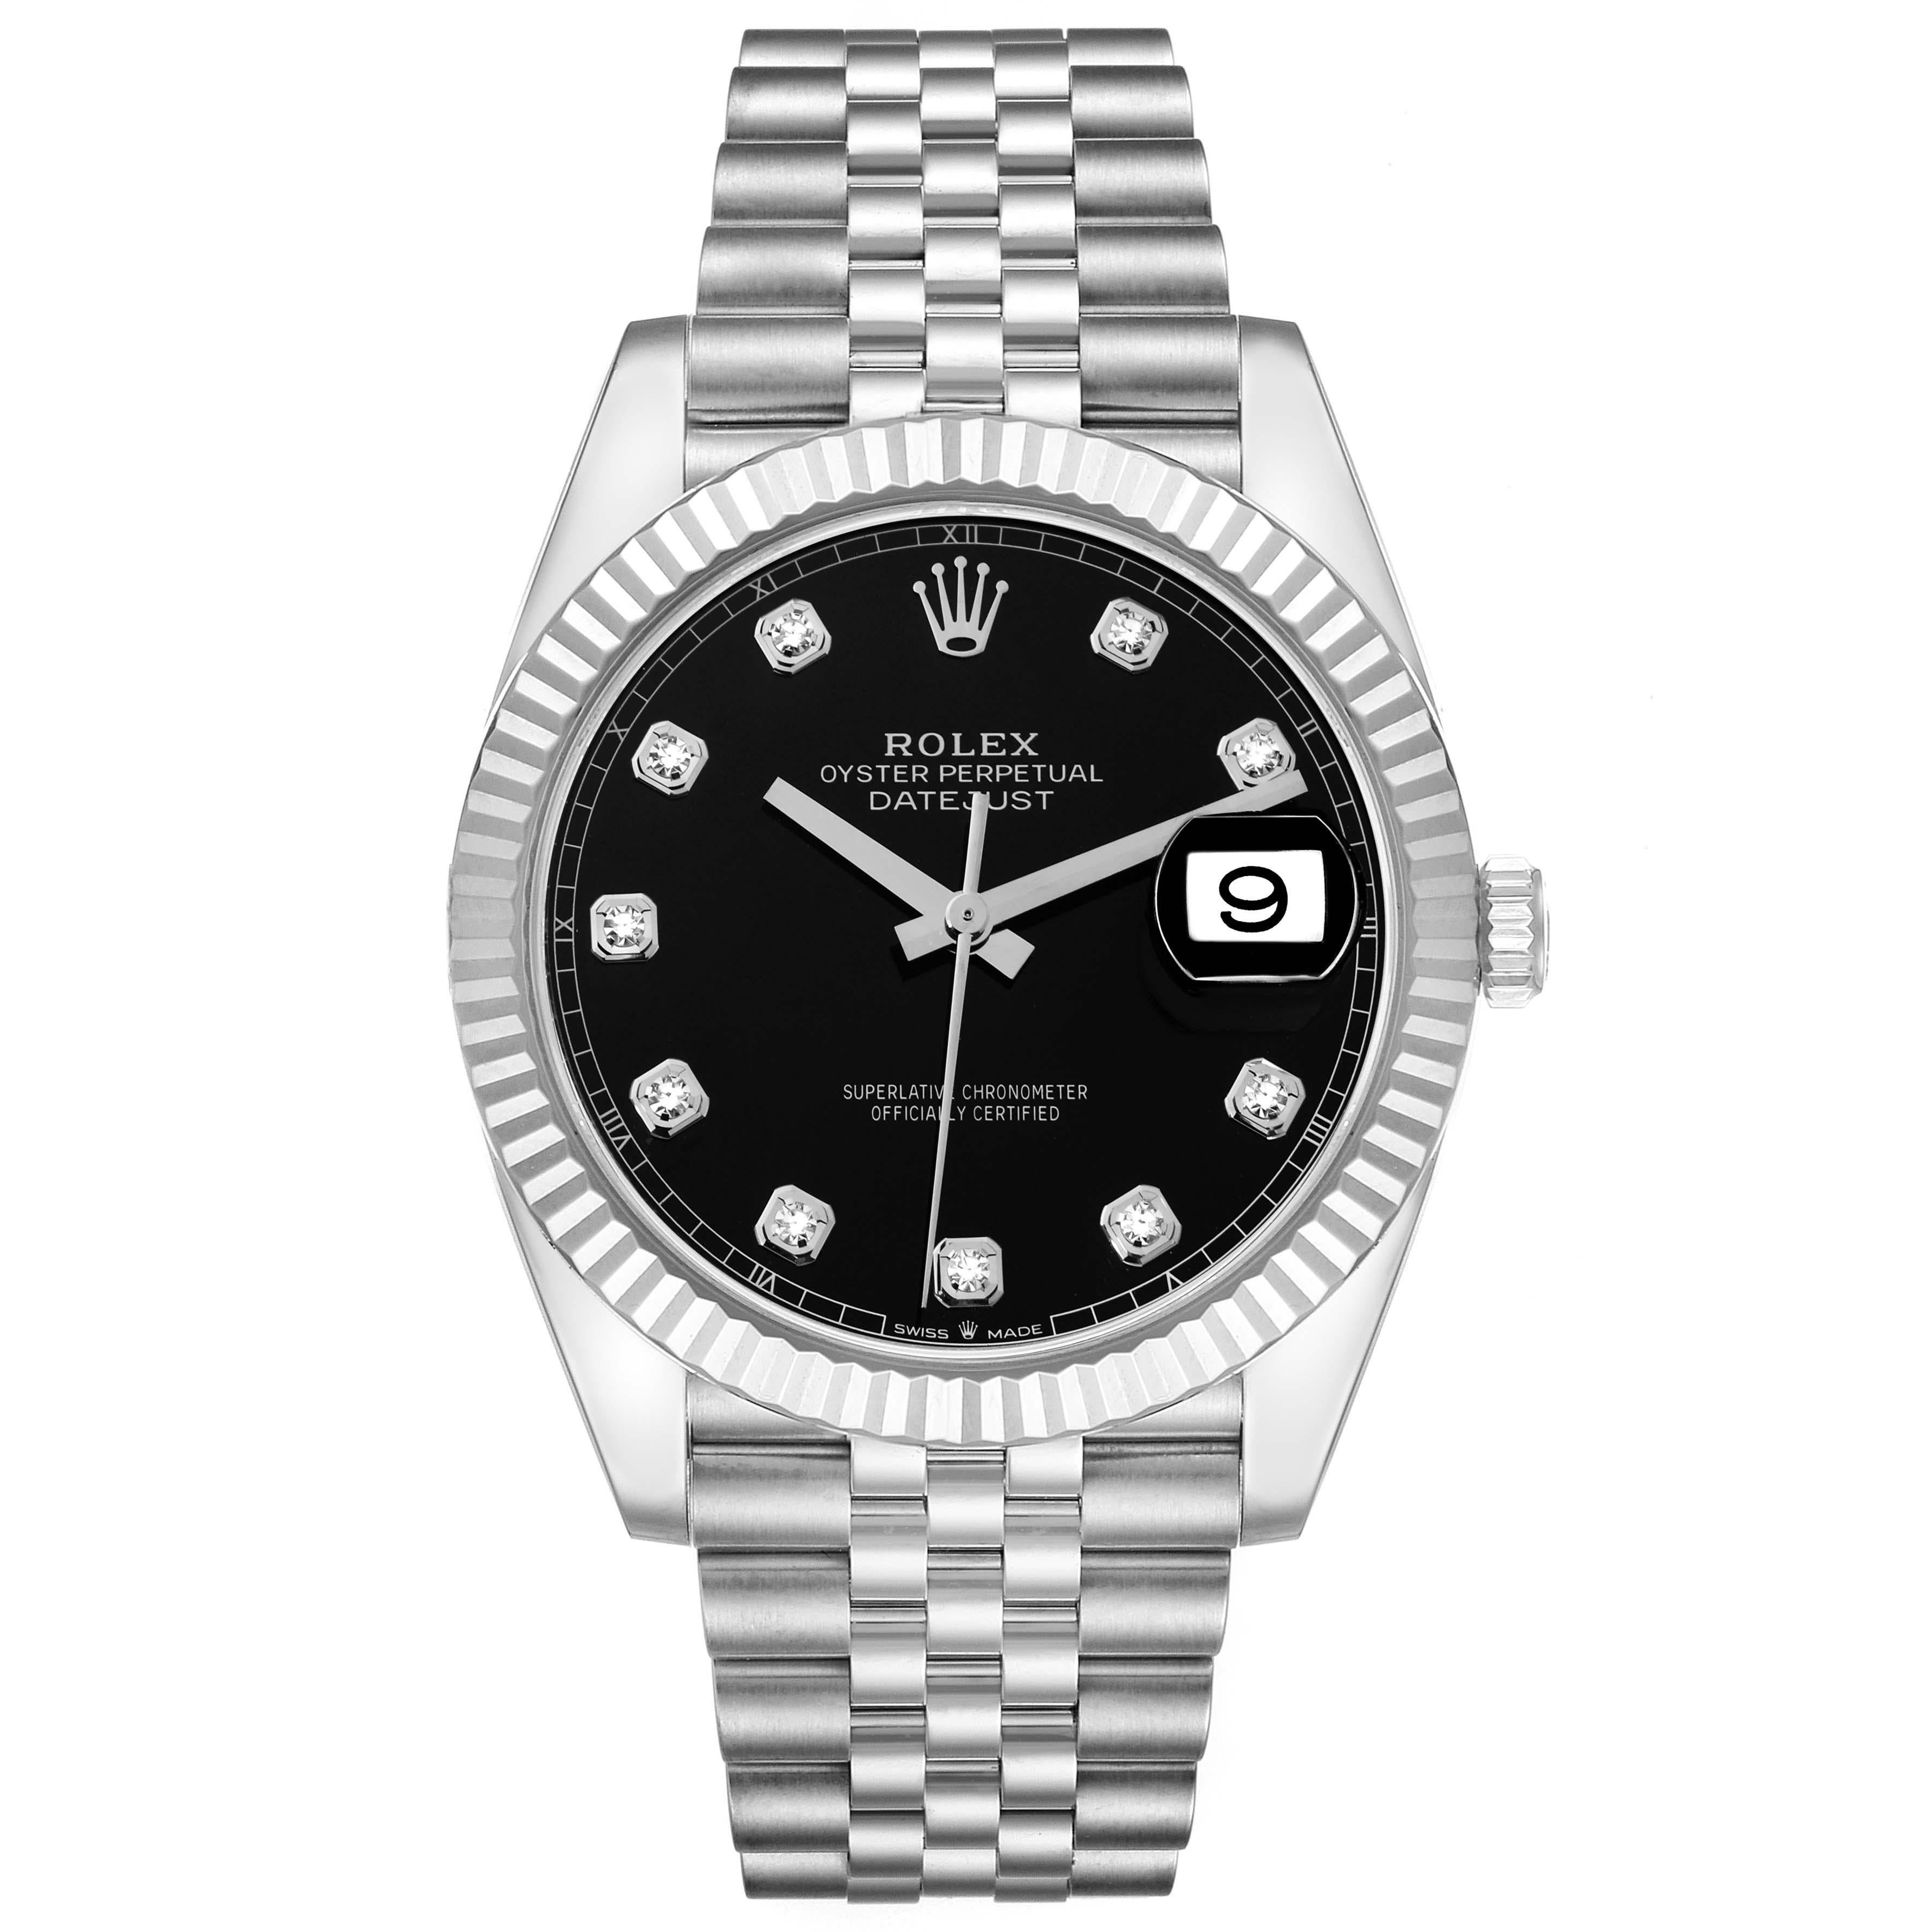 Rolex Datejust 41 Steel White Gold Black Diamond Dial Mens Watch 126334 Box Card. Officially certified chronometer automatic self-winding movement. Stainless steel case 41 mm in diameter. Rolex logo on a crown. 18K white gold fluted bezel. Scratch